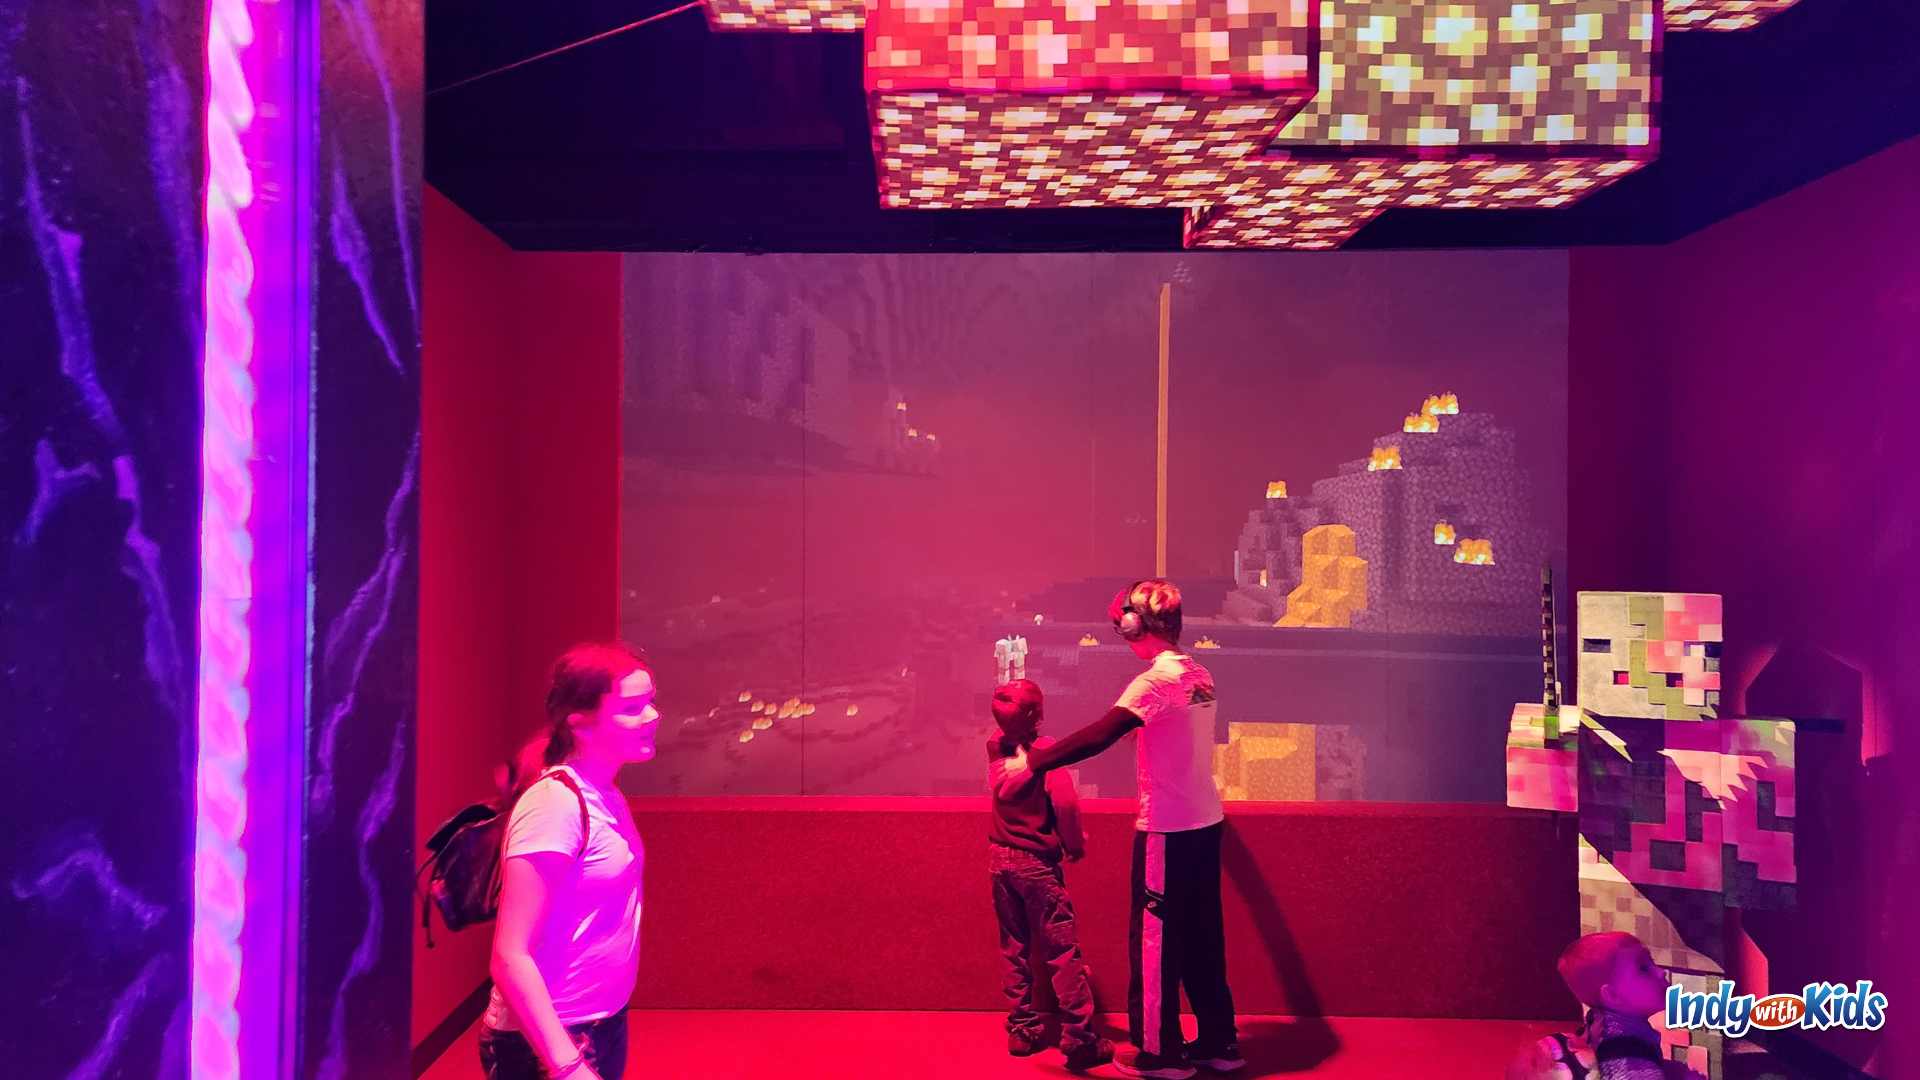 Minecraft: The Exhibition at The Children's Museum of Indianapolis Nether portal